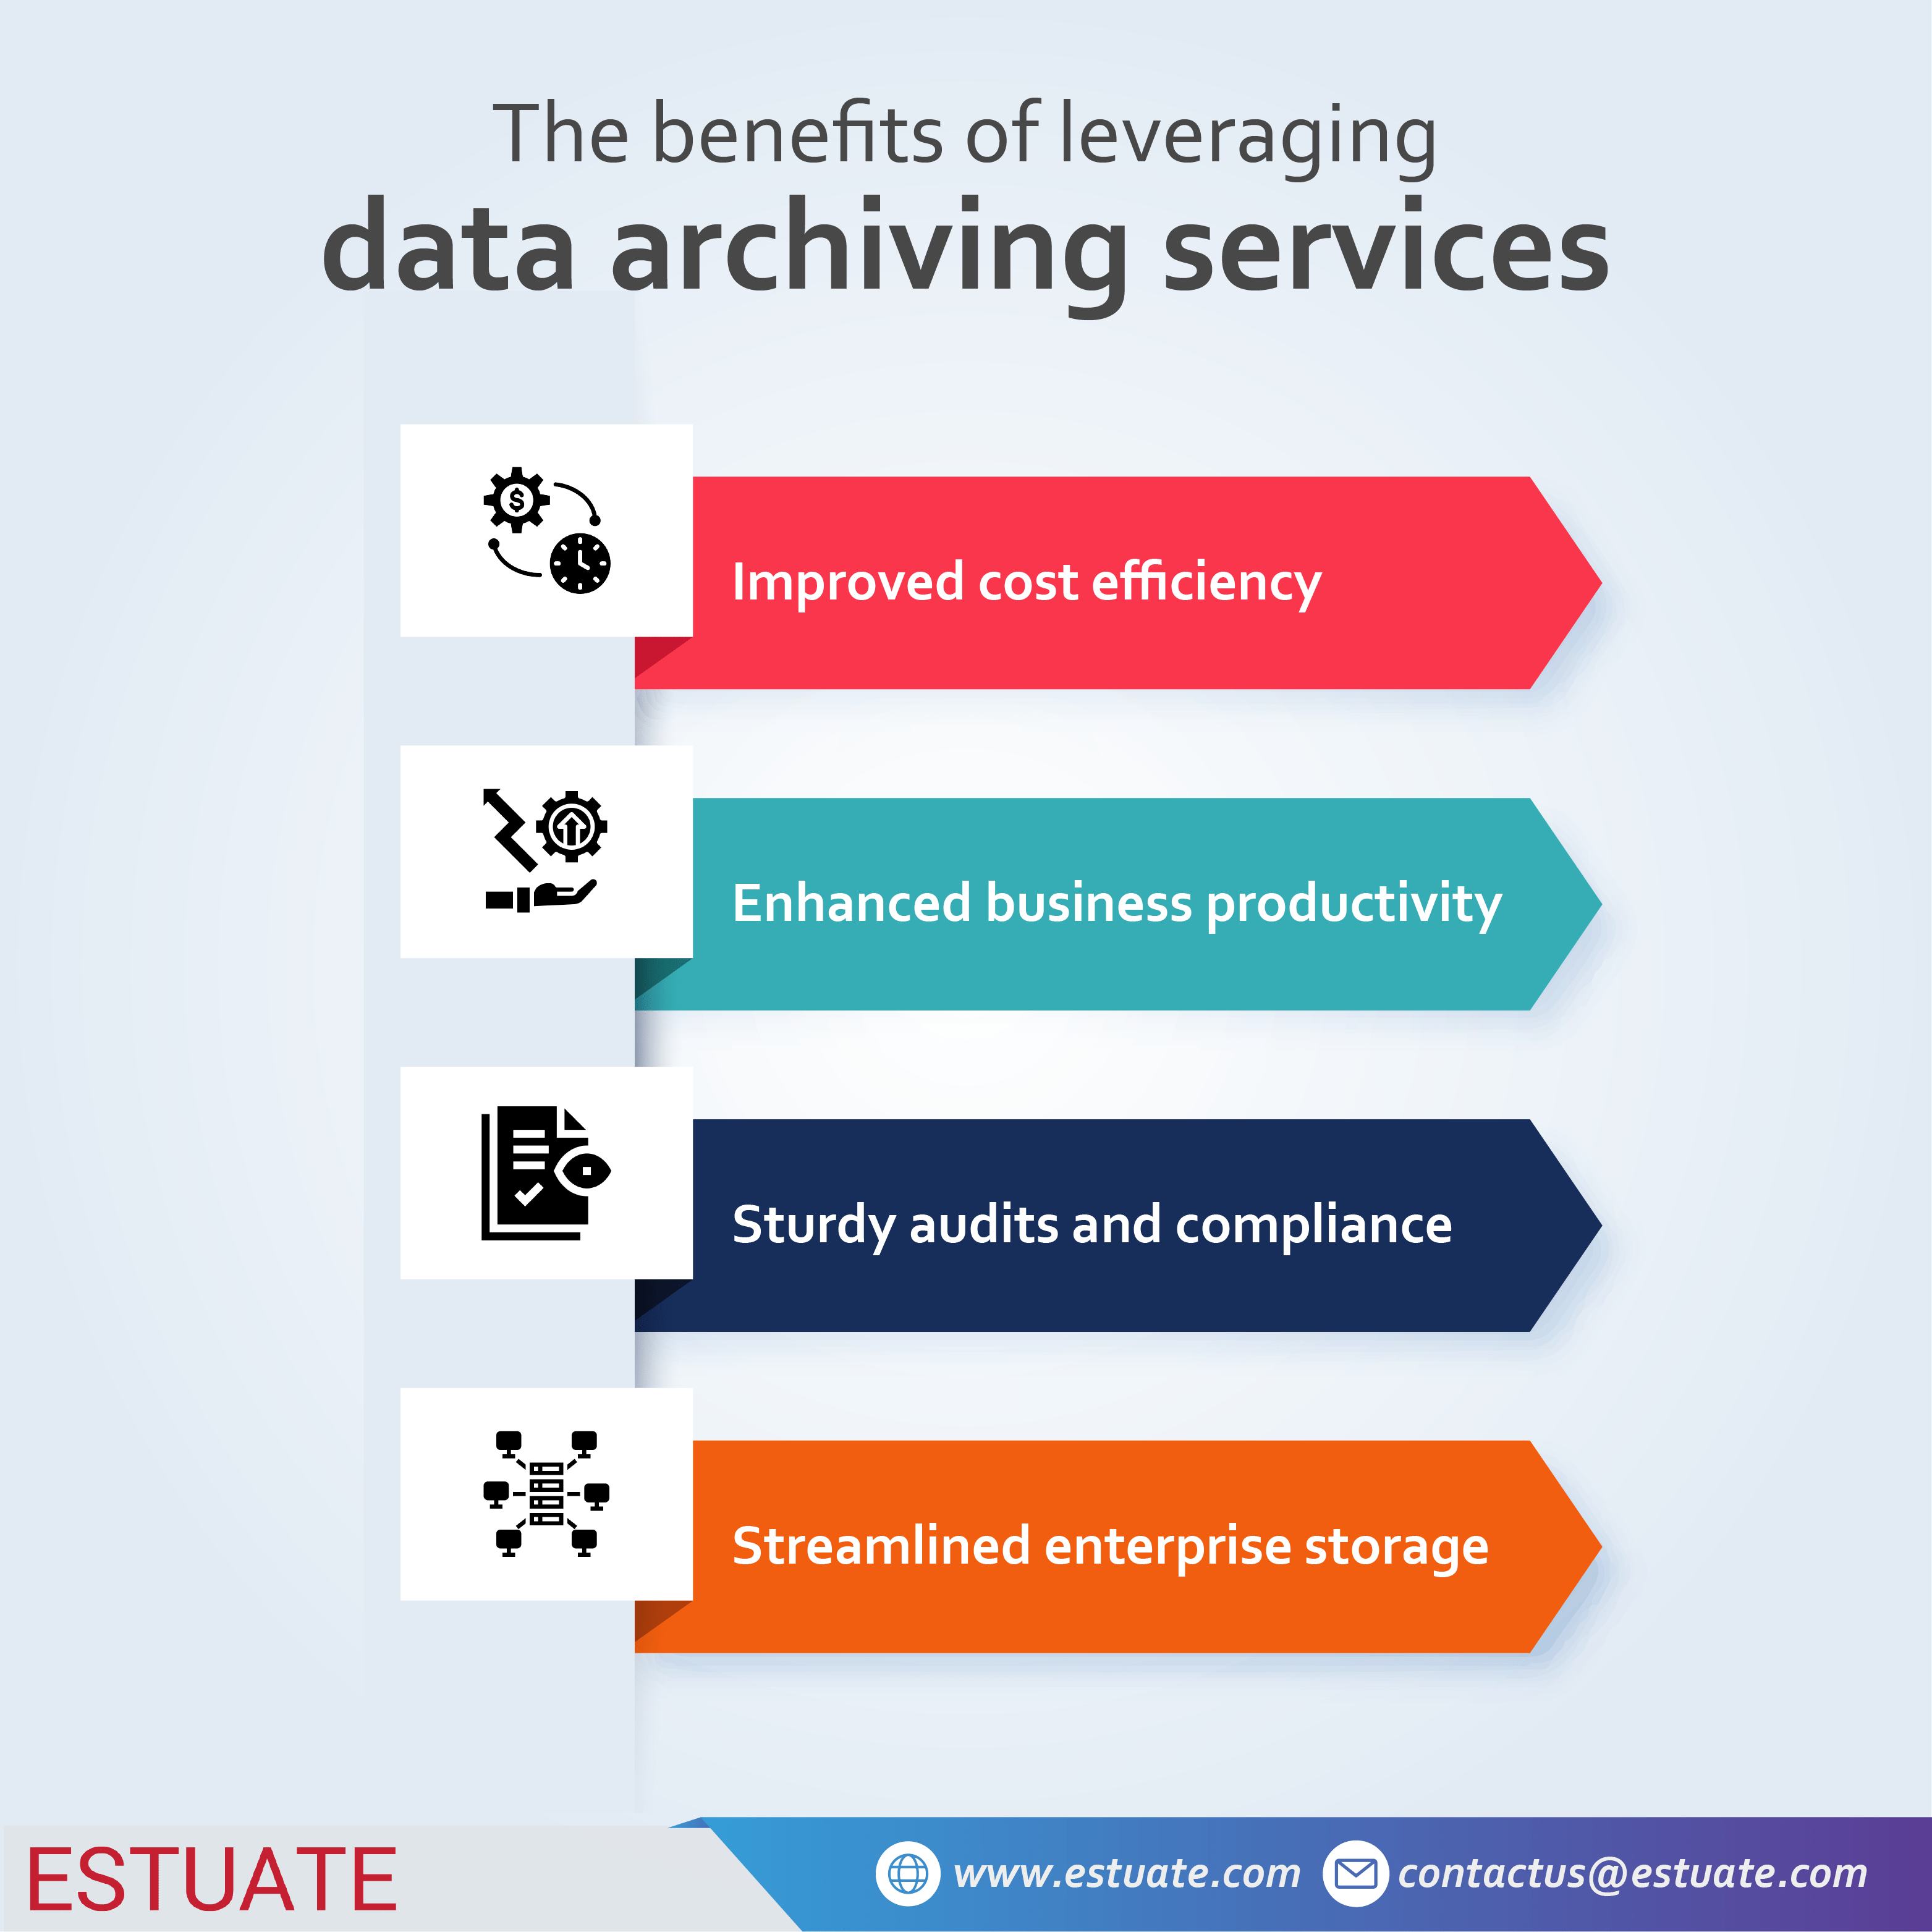 The benefits of leveraging data archiving services